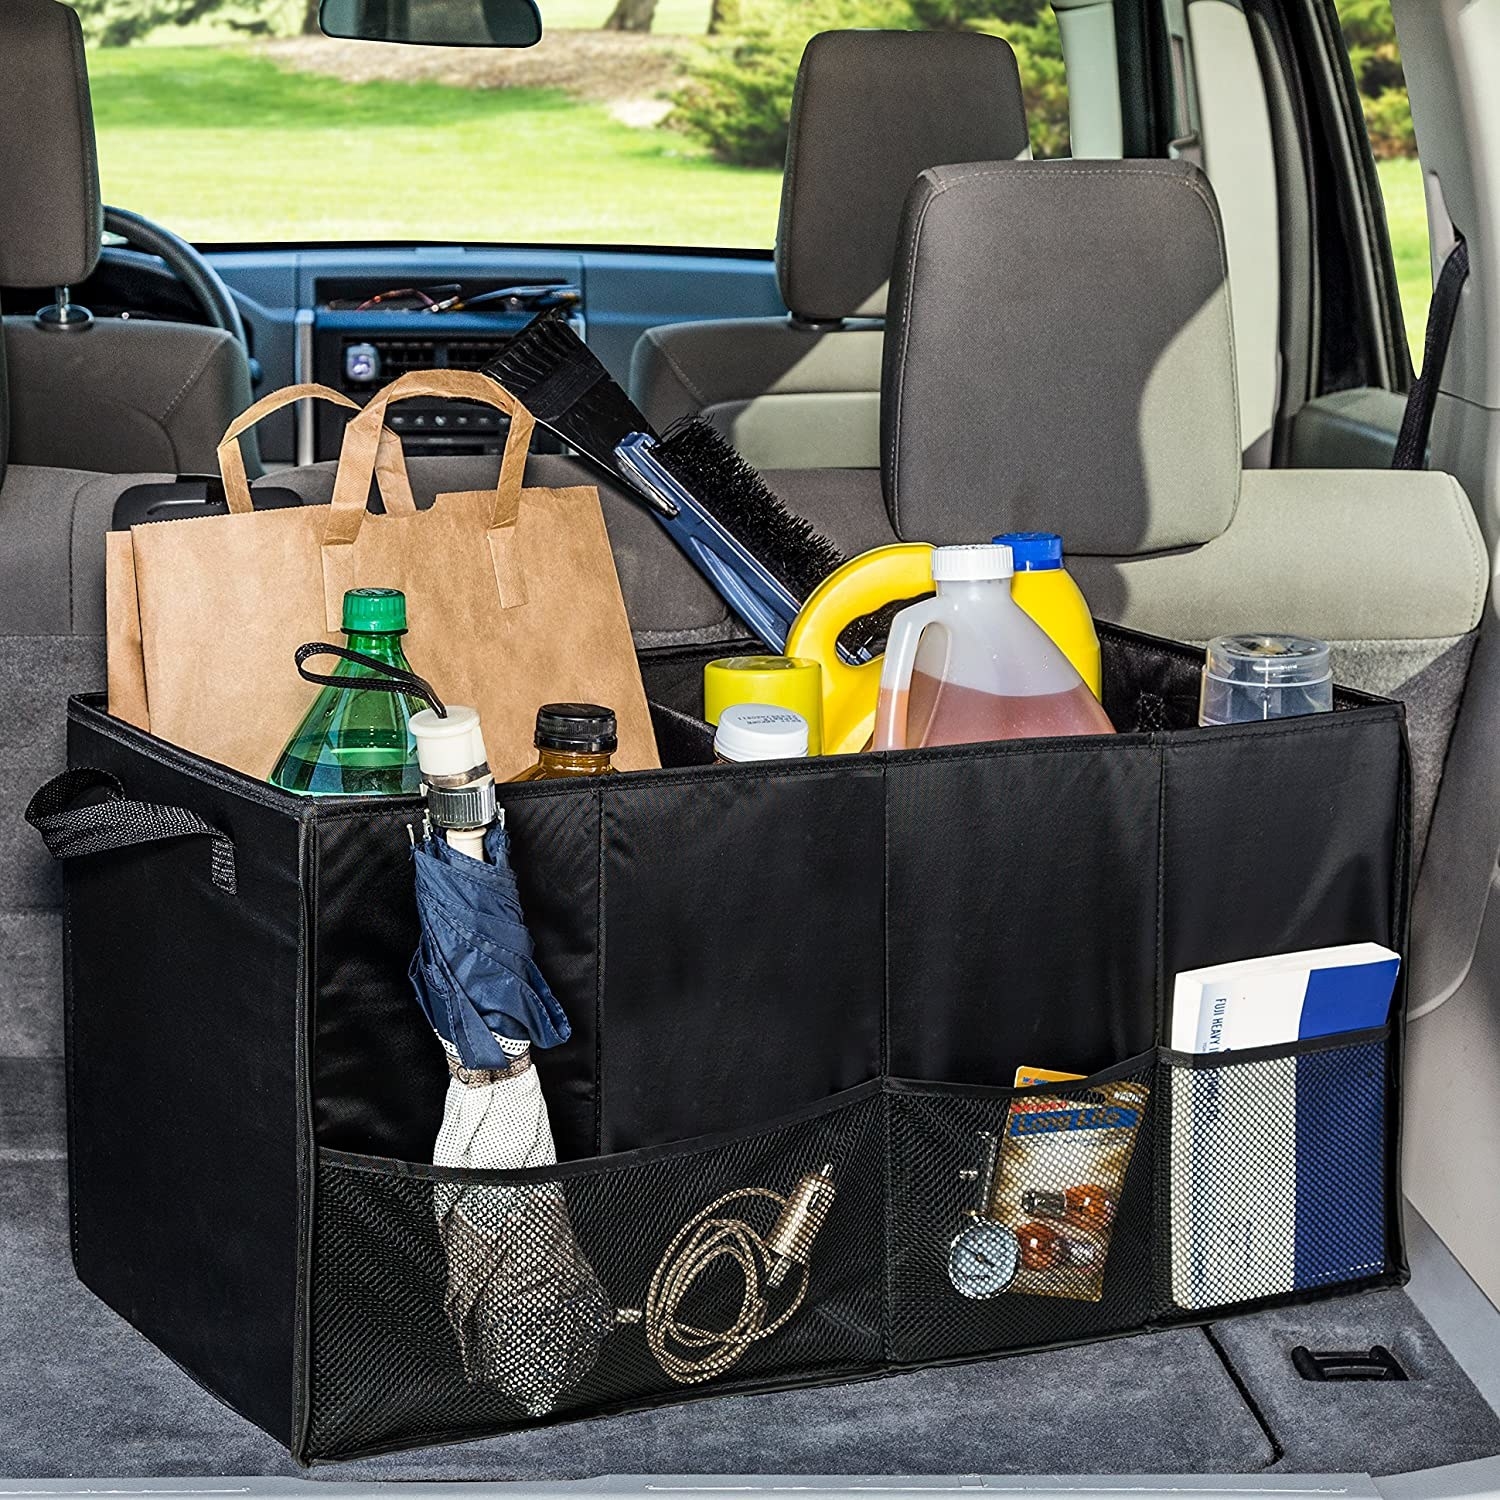 Top five practical accessories to make your car an easier place to live